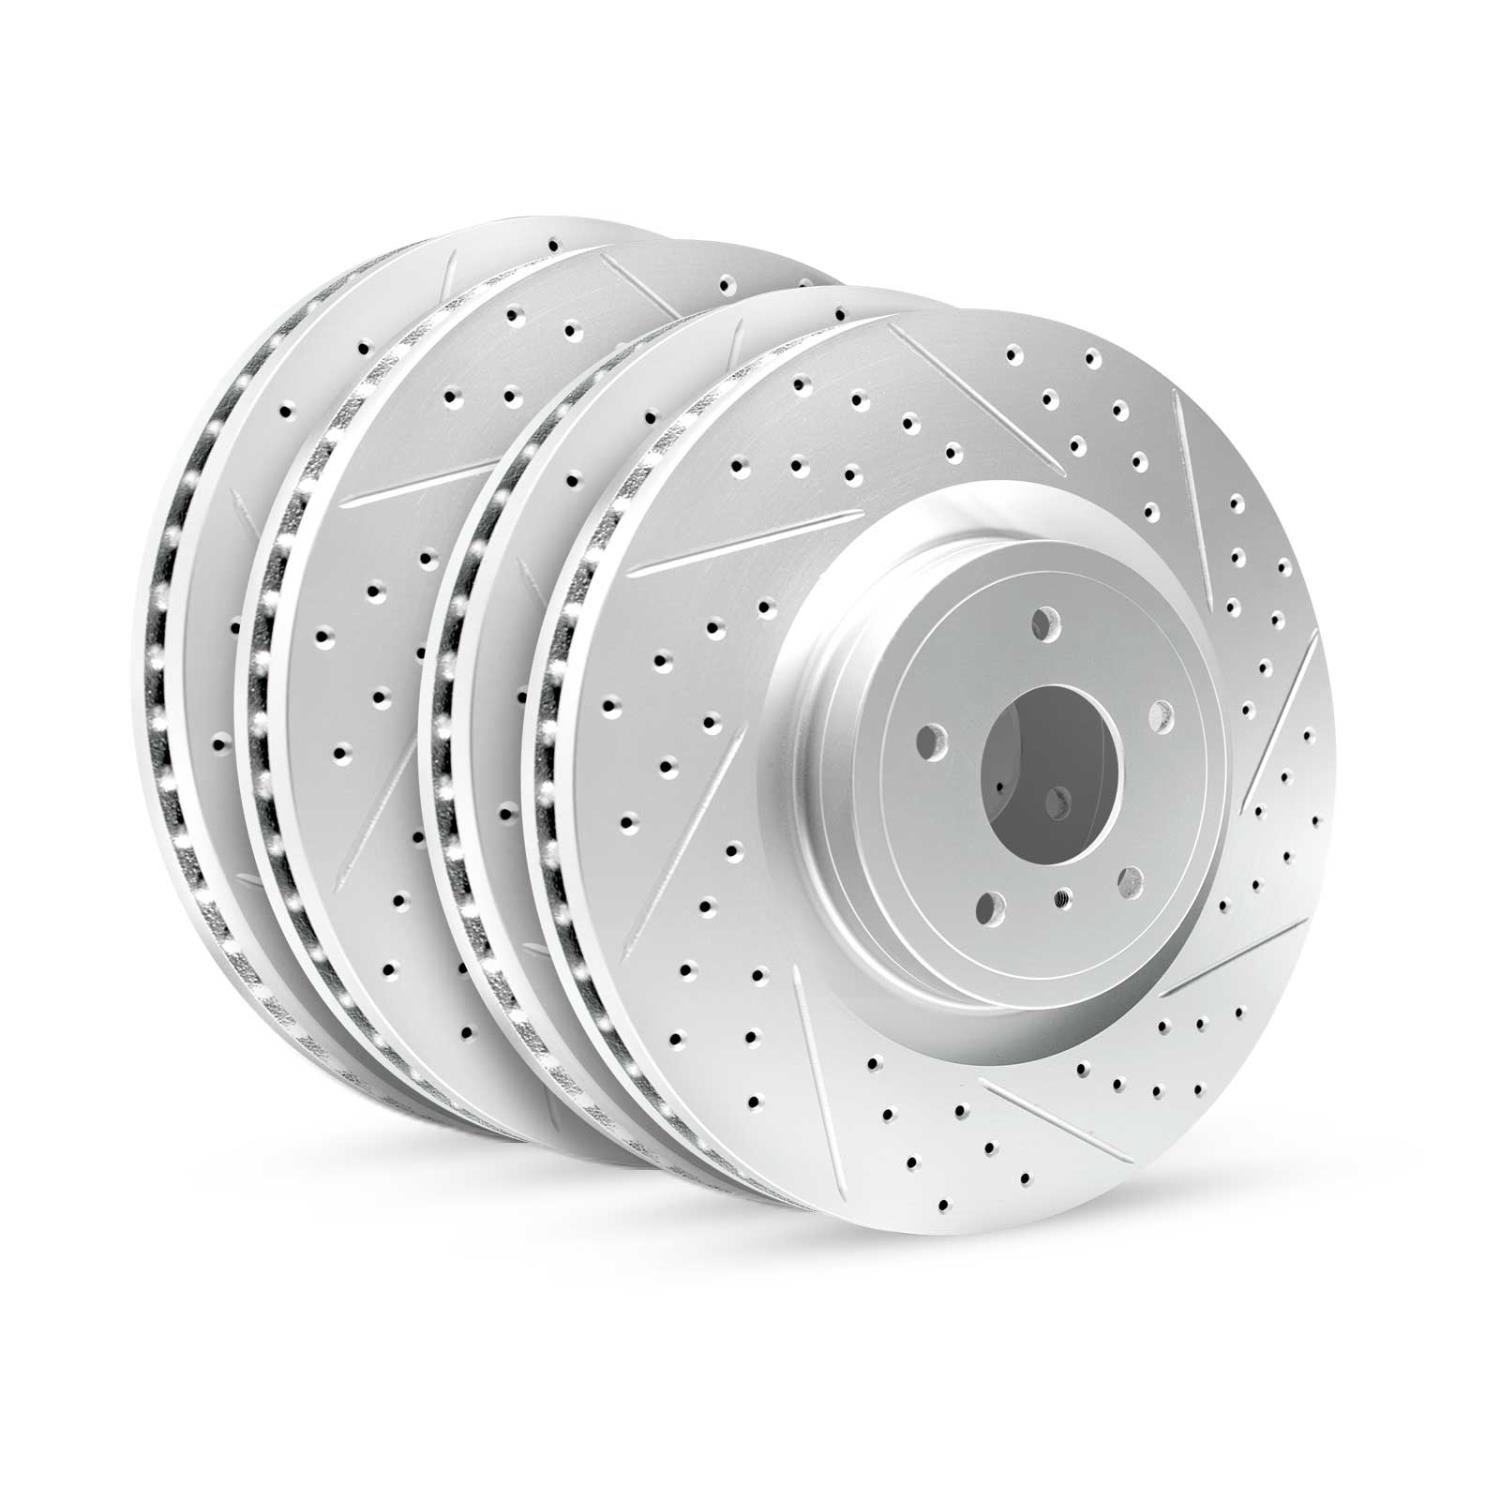 GEO-Carbon Drilled/Slotted Rotors, 1996-2007 Fits Multiple Makes/Models, Position: Front/Rear